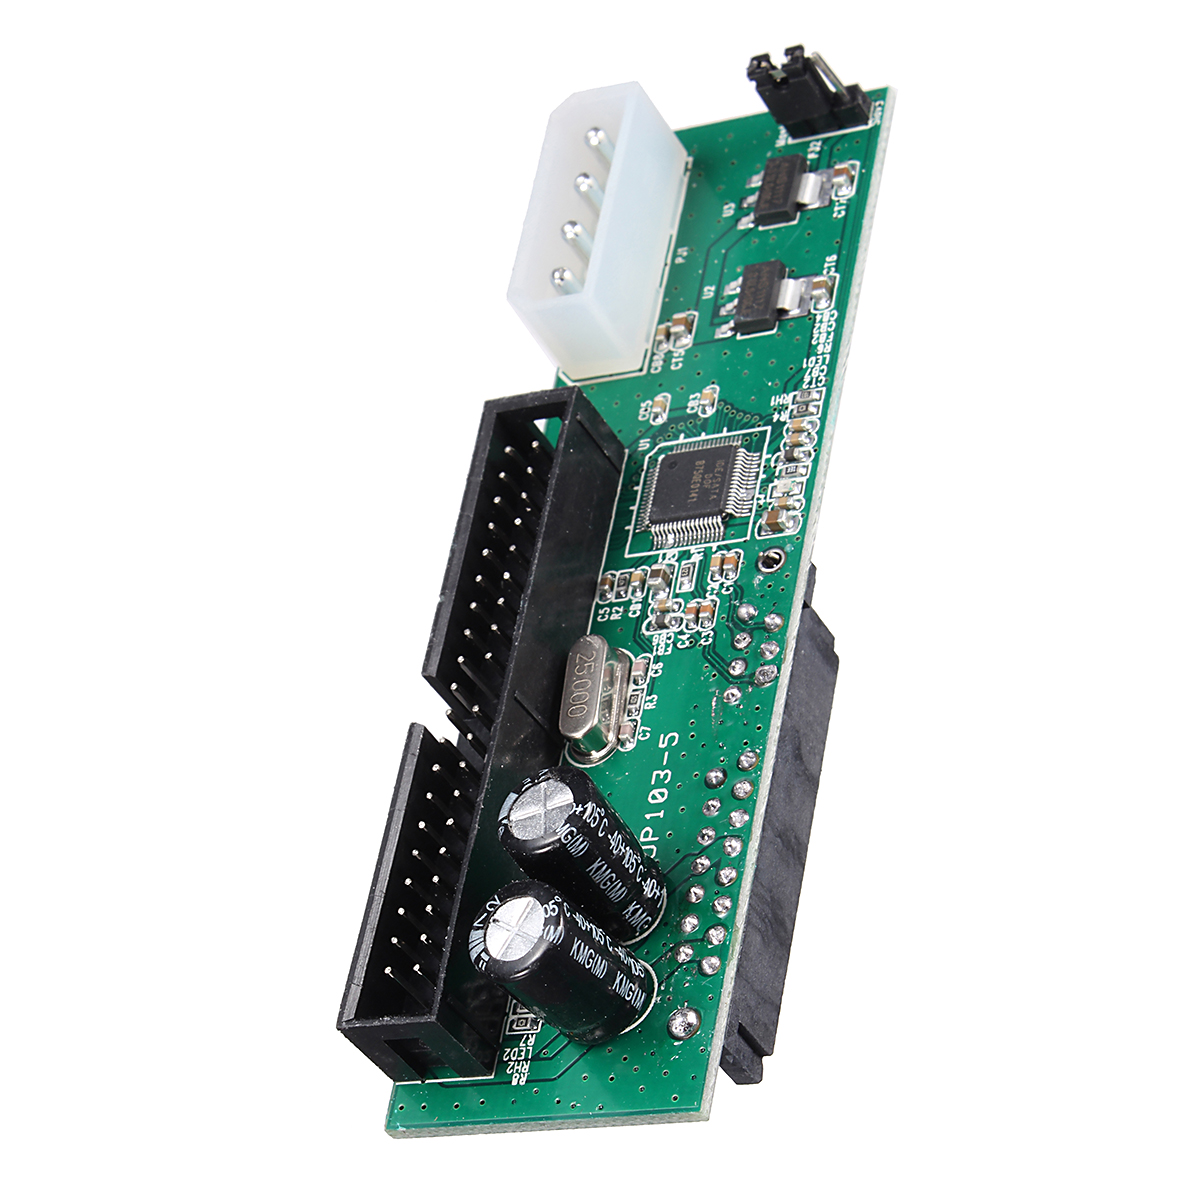 SATA-to-IDE-Conversion-Card-JM-Chip-Serial-to-Parallel-Port-1151690